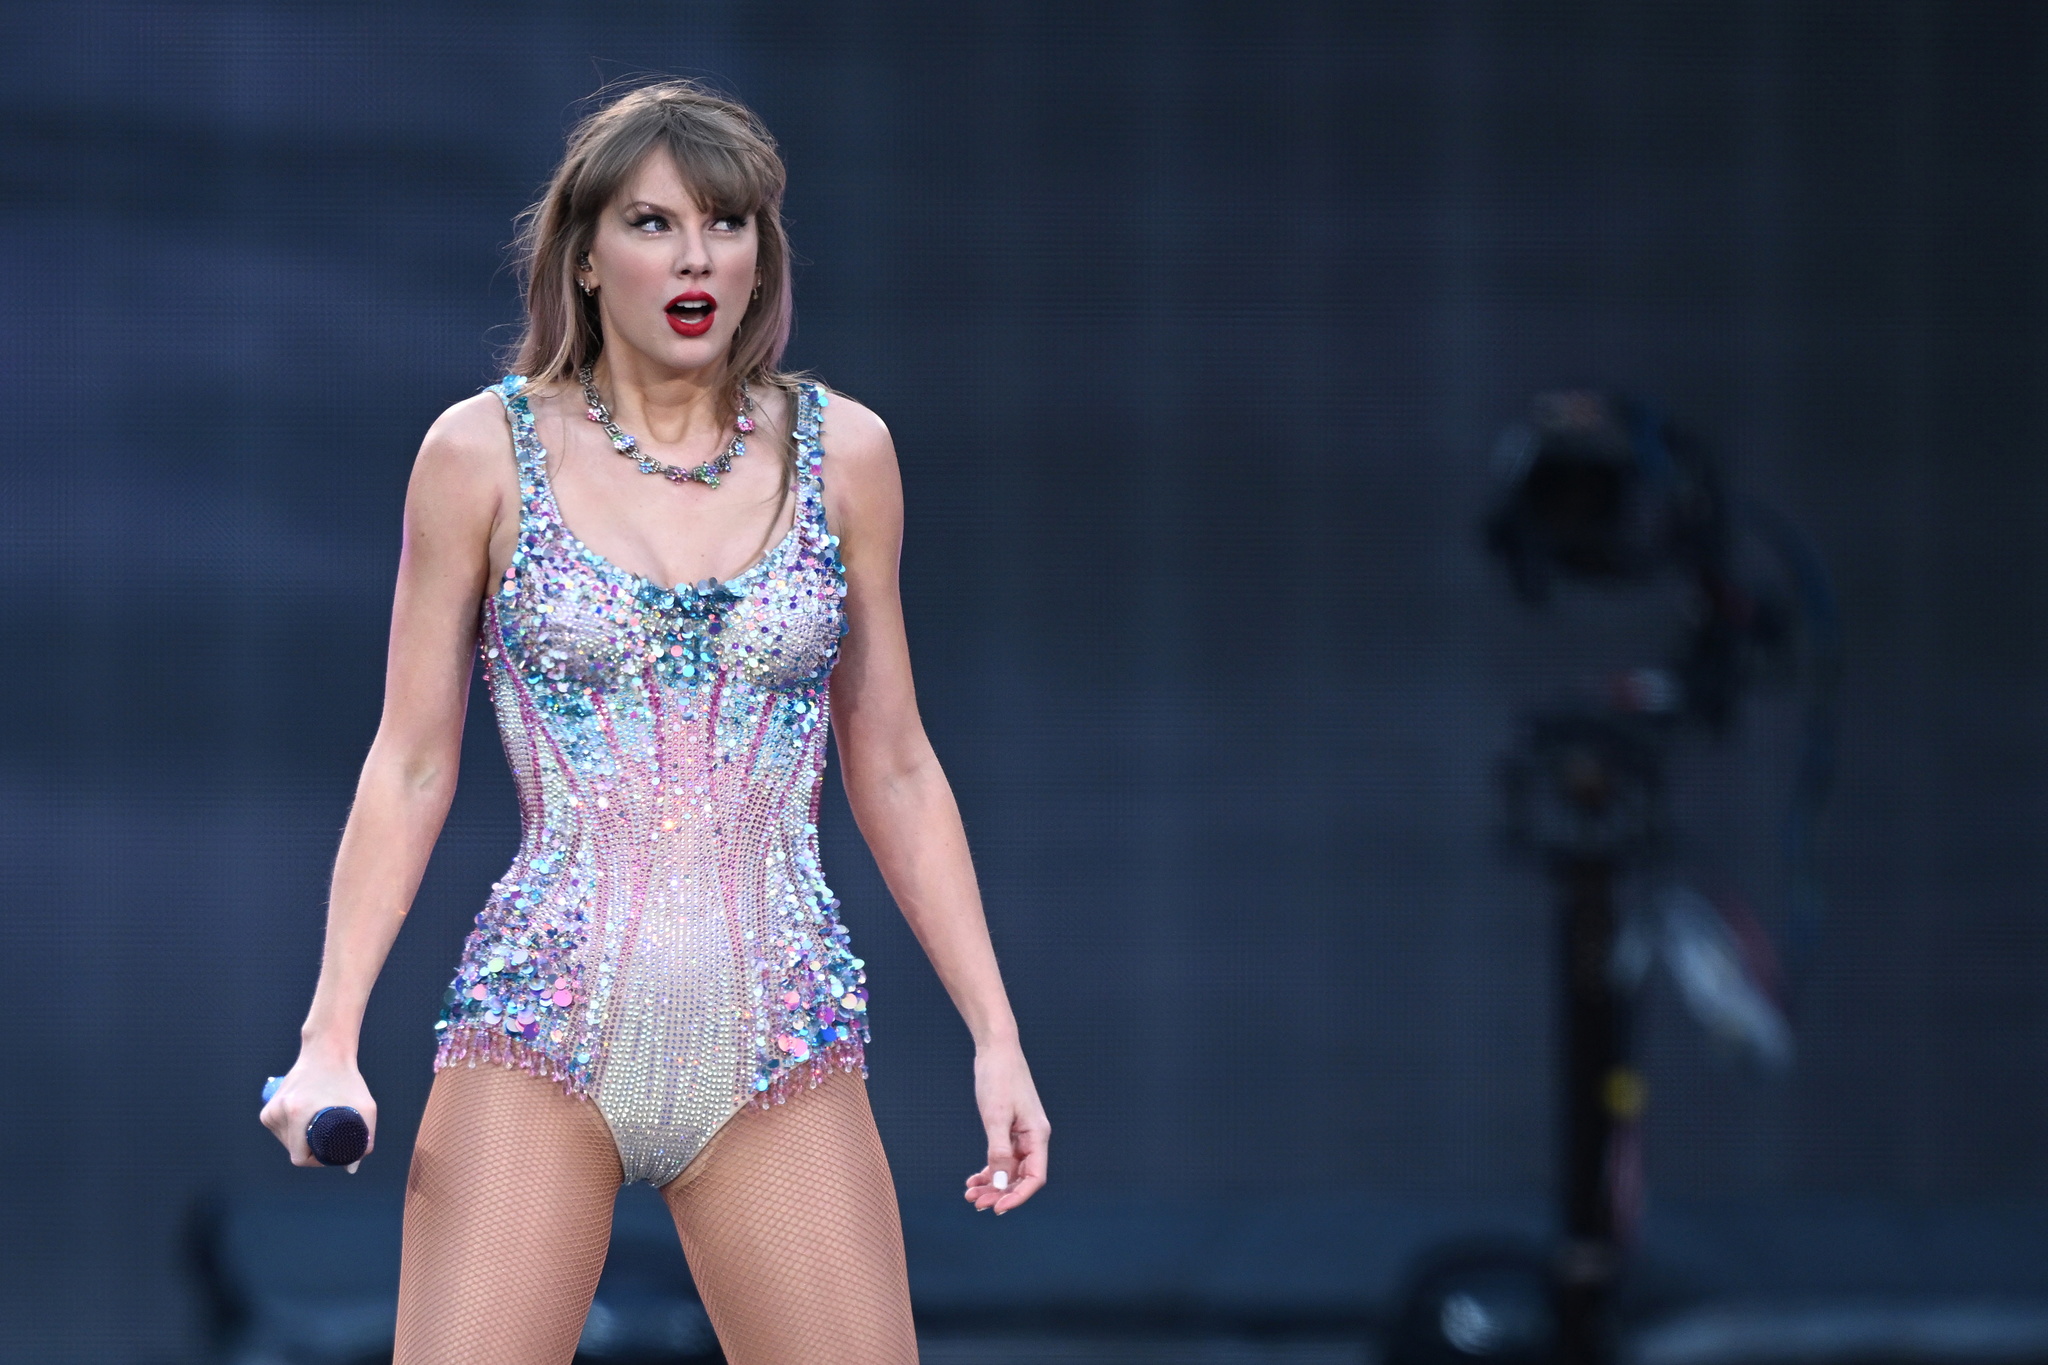 Taylor Swift during the first night of the The Eras Tour in Australia at the Melbourne Cricket Ground